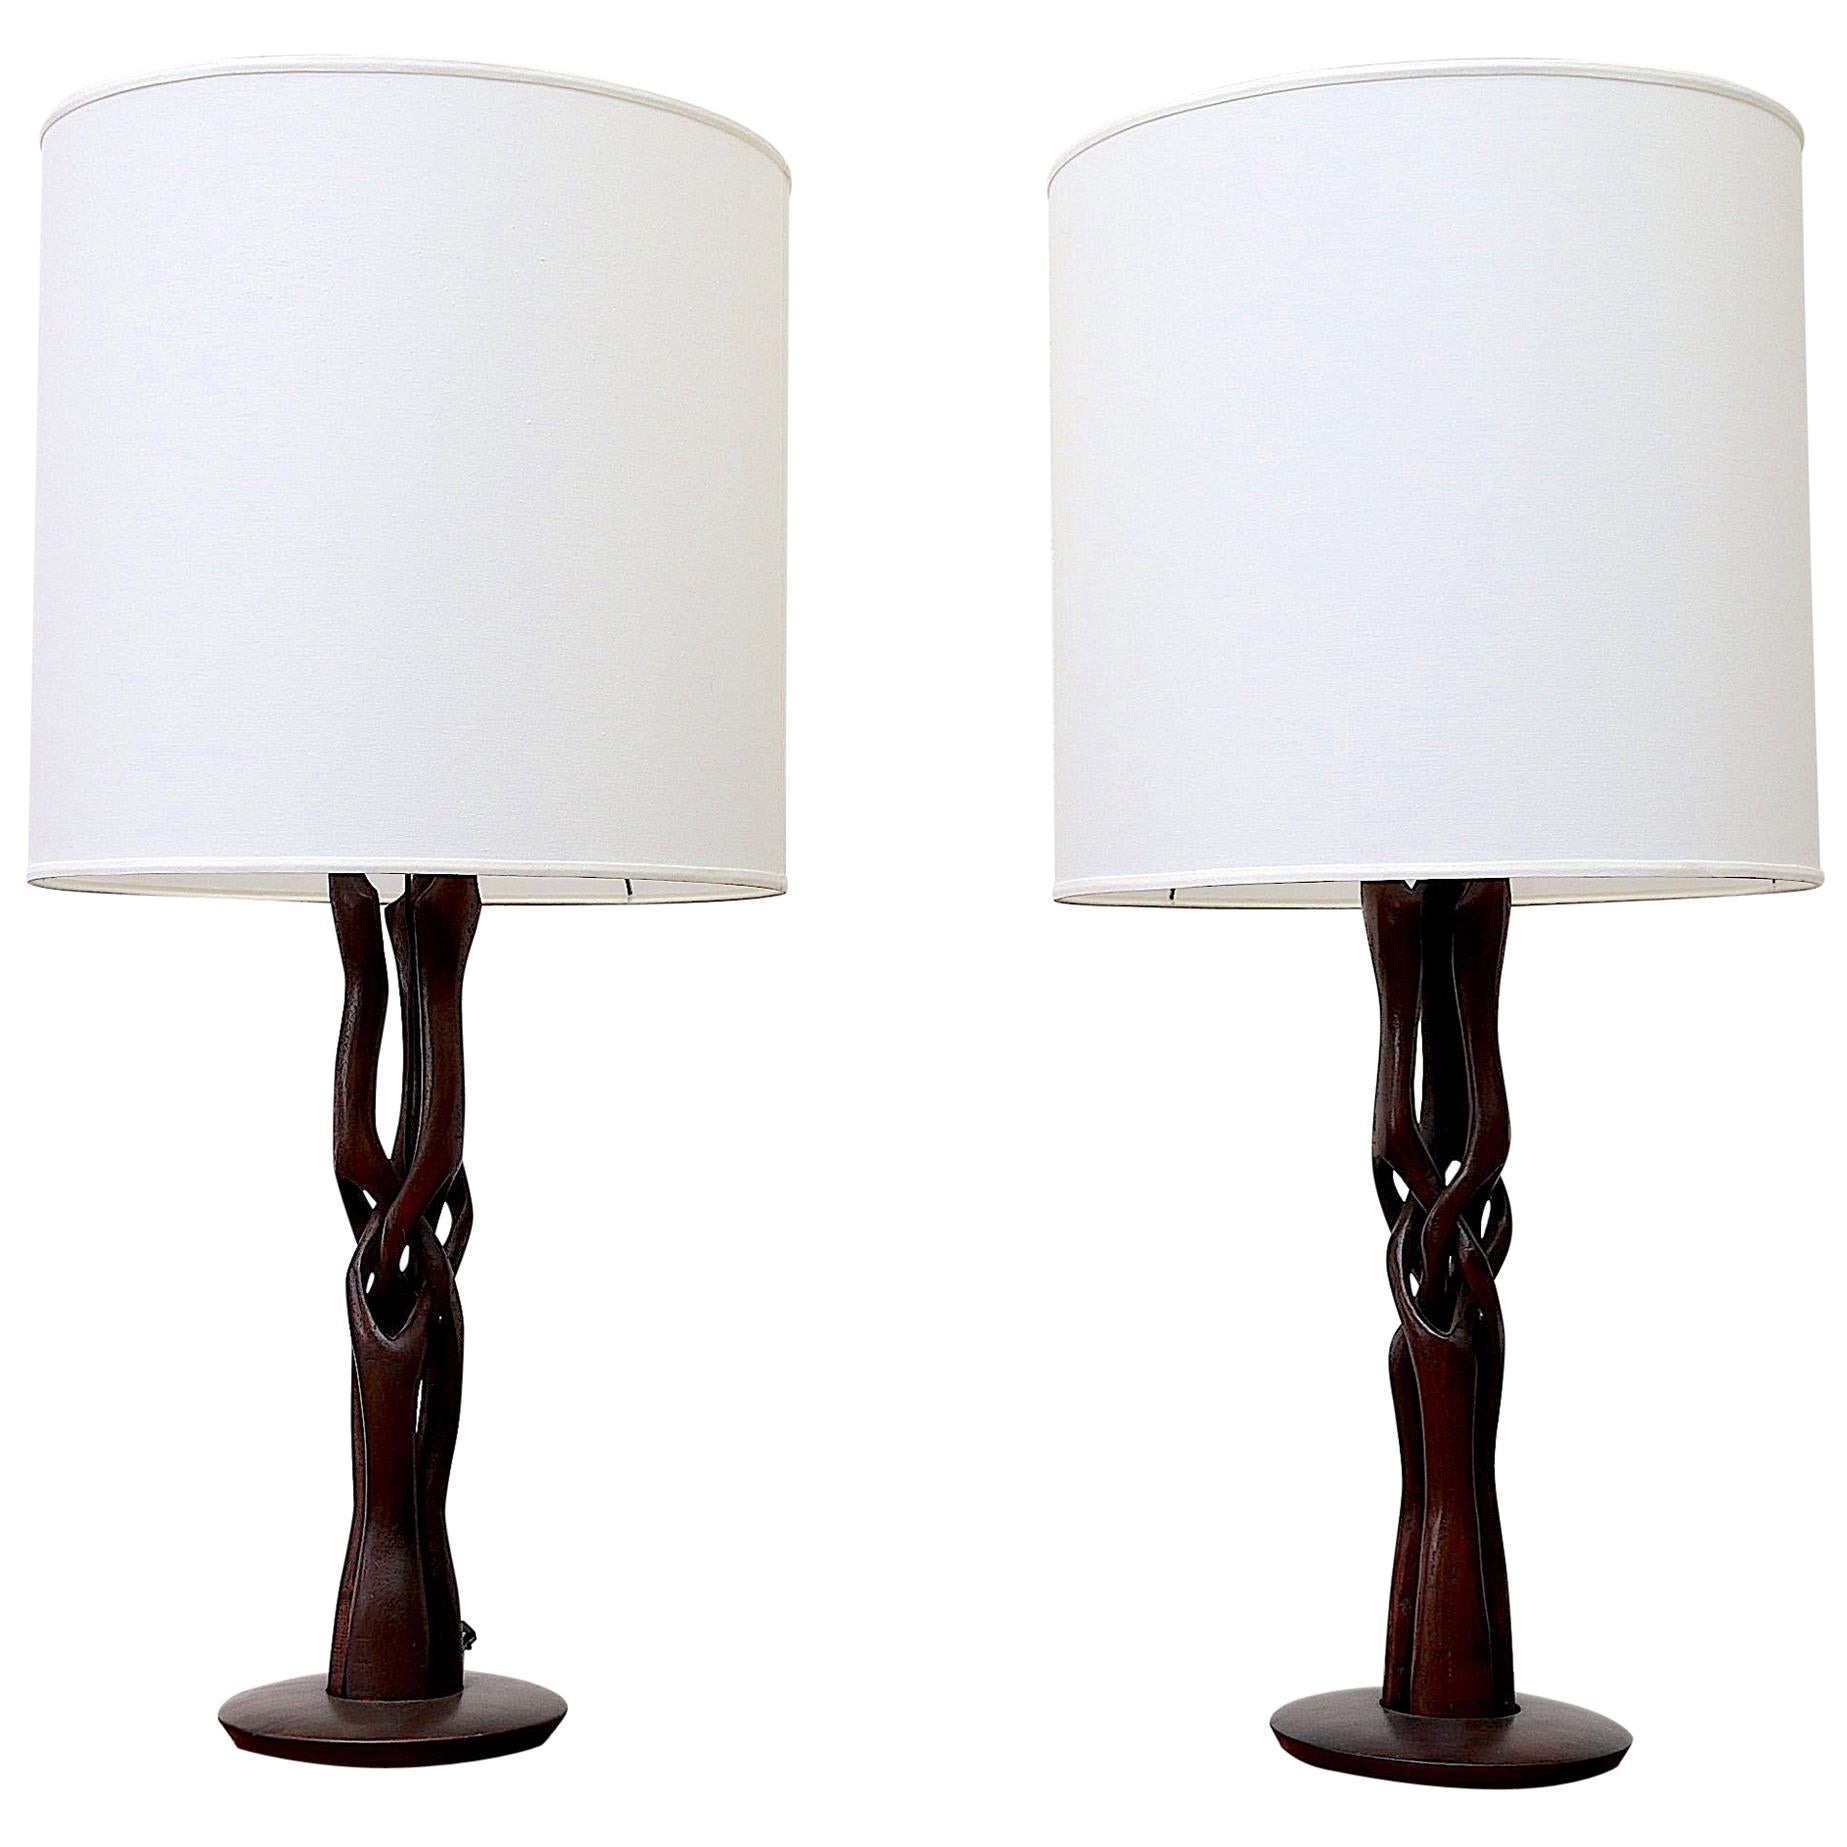 Pair of Midcentury Organic Carved Teak Table Lamp with New Shades